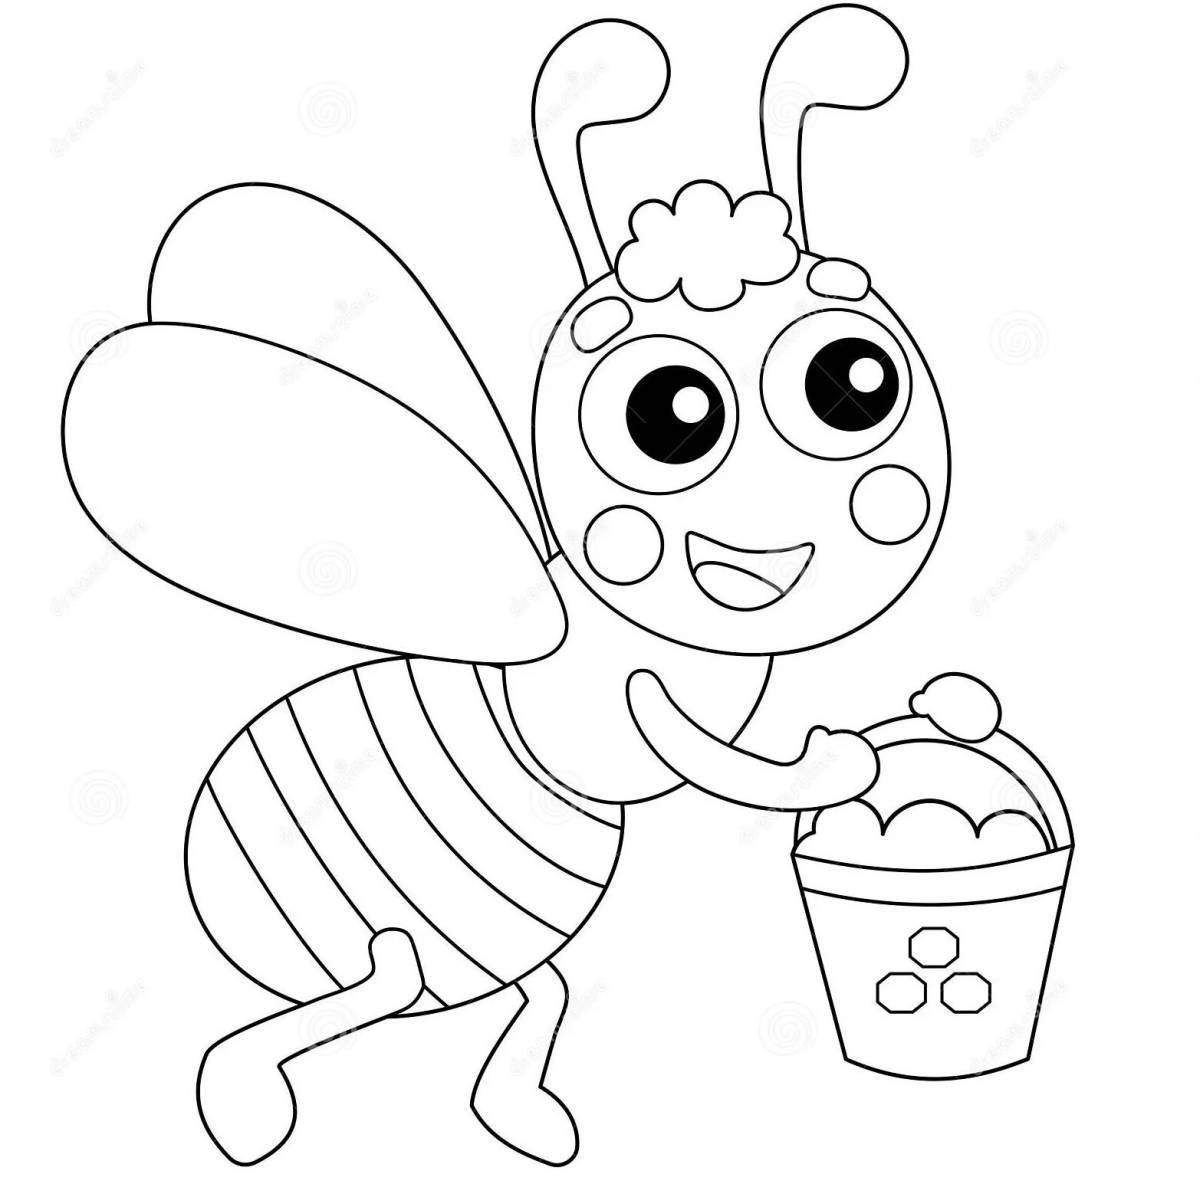 Great honey coloring book for babies